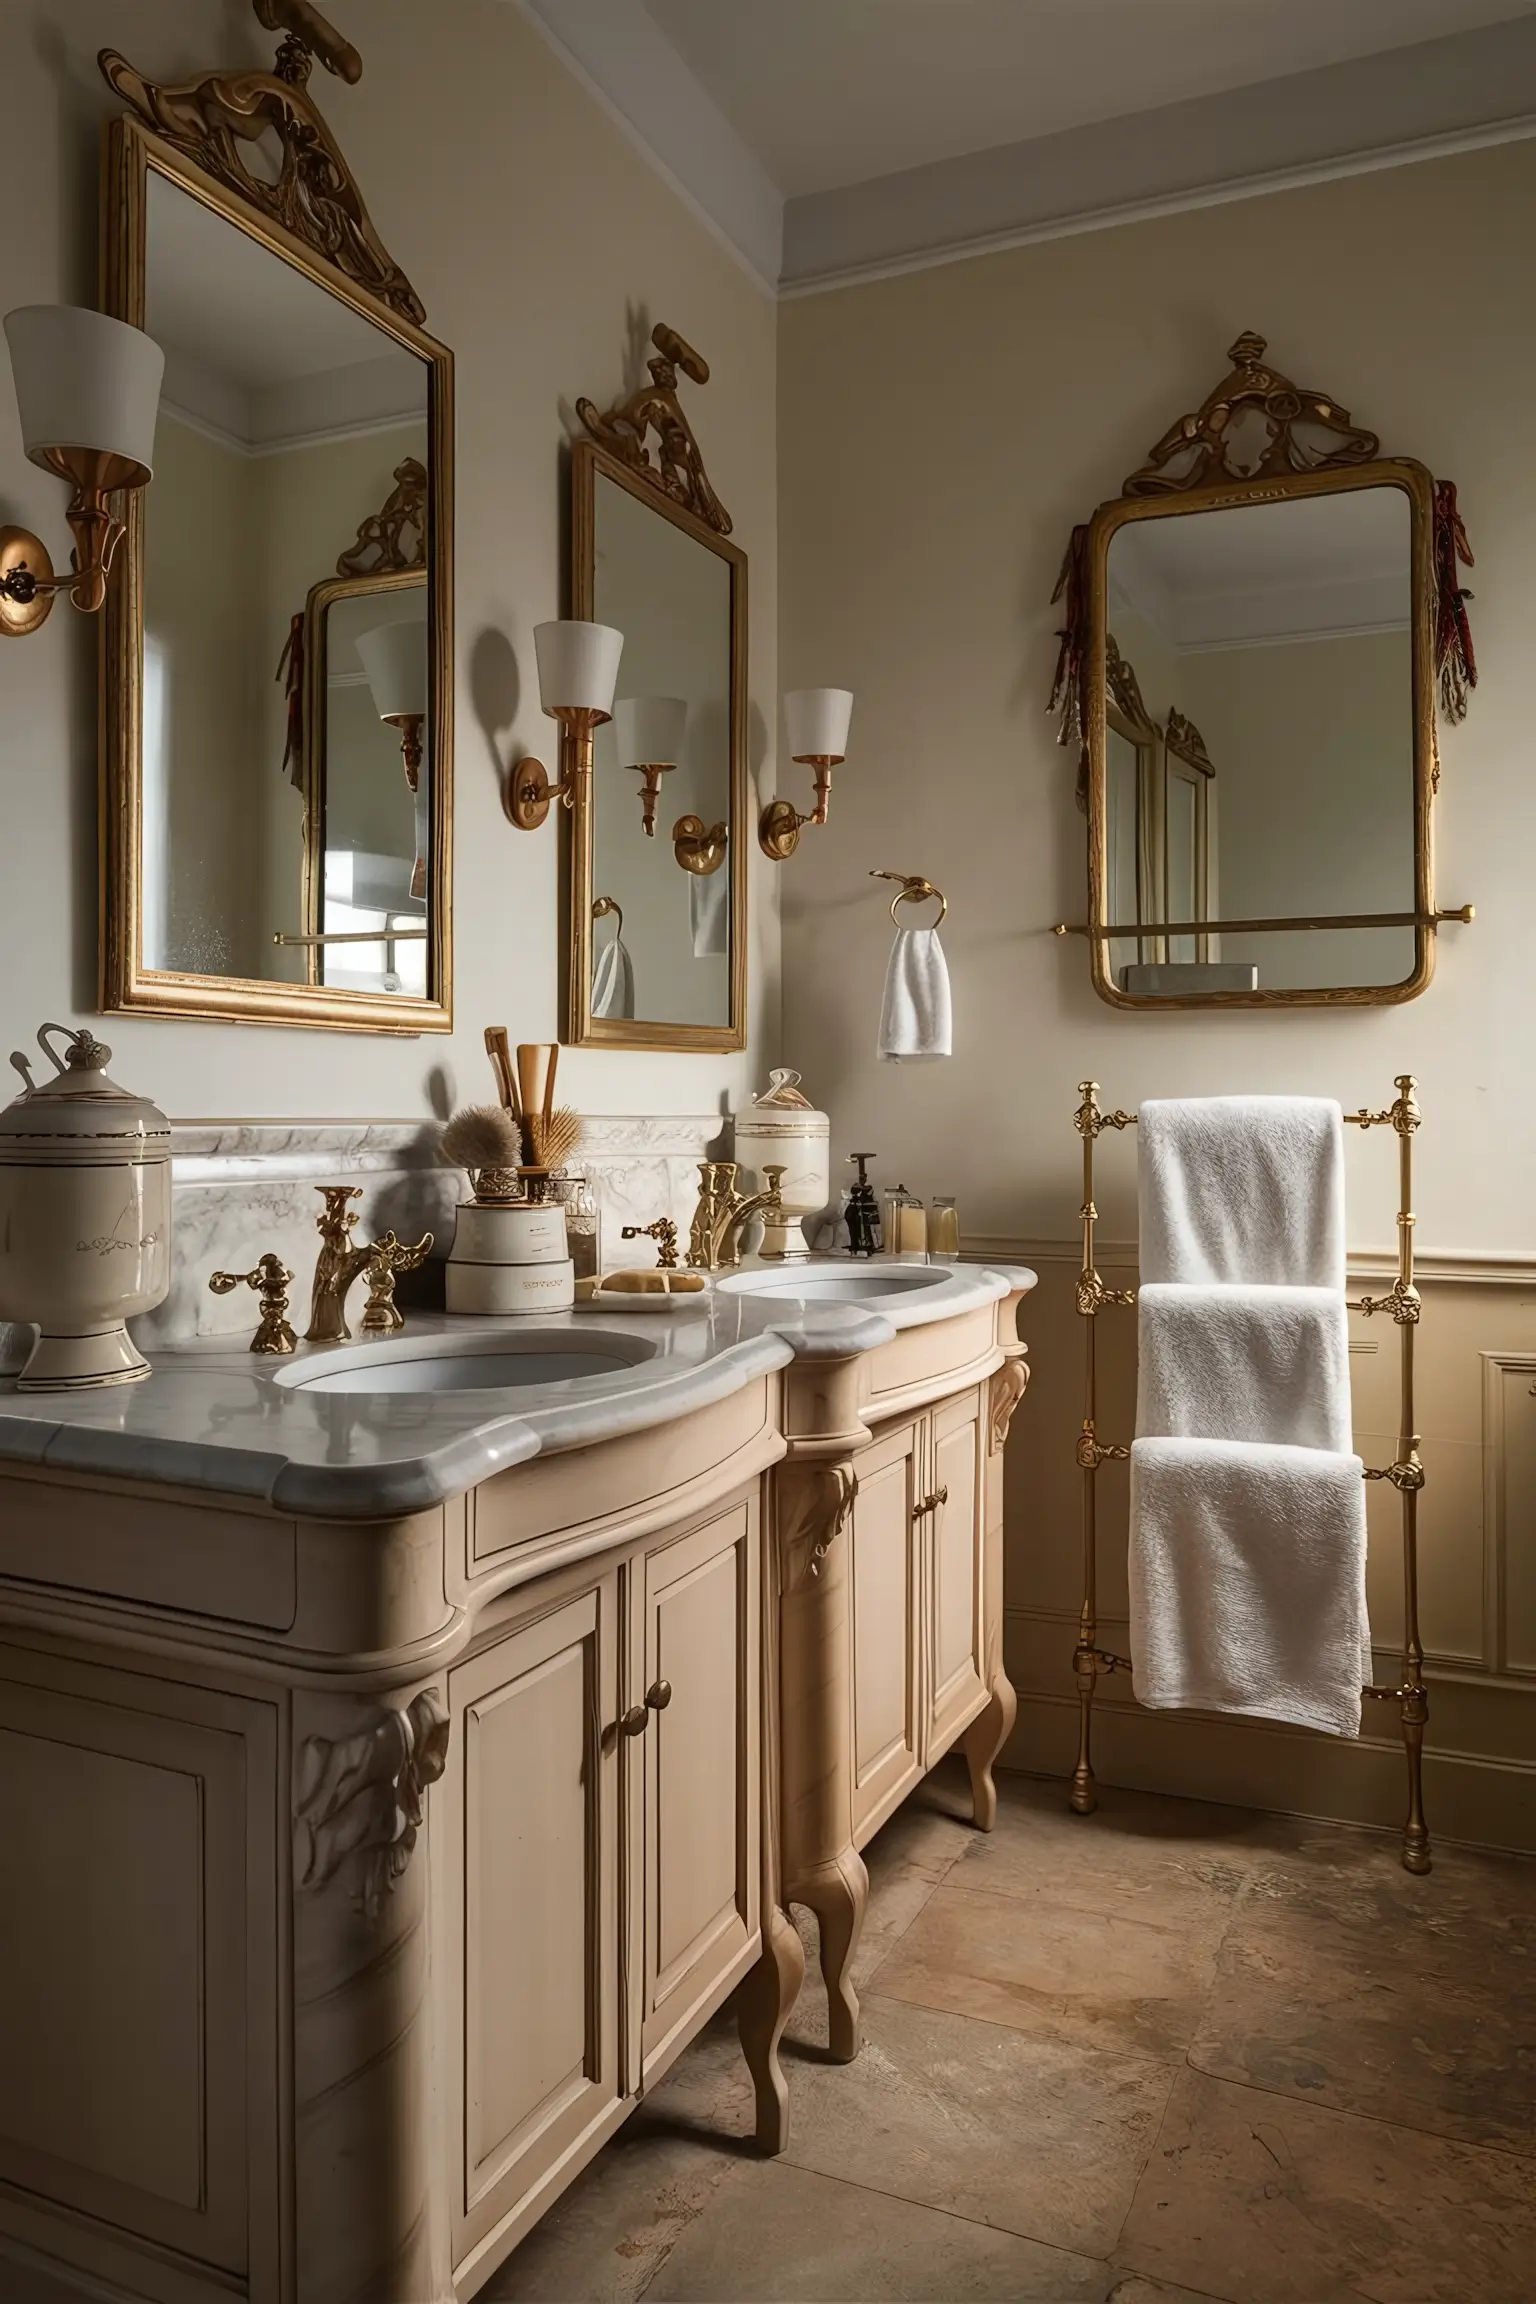 Traditional bathroom with decor accessories, including vintage mirrors, elegant towel racks, and decorative jars.